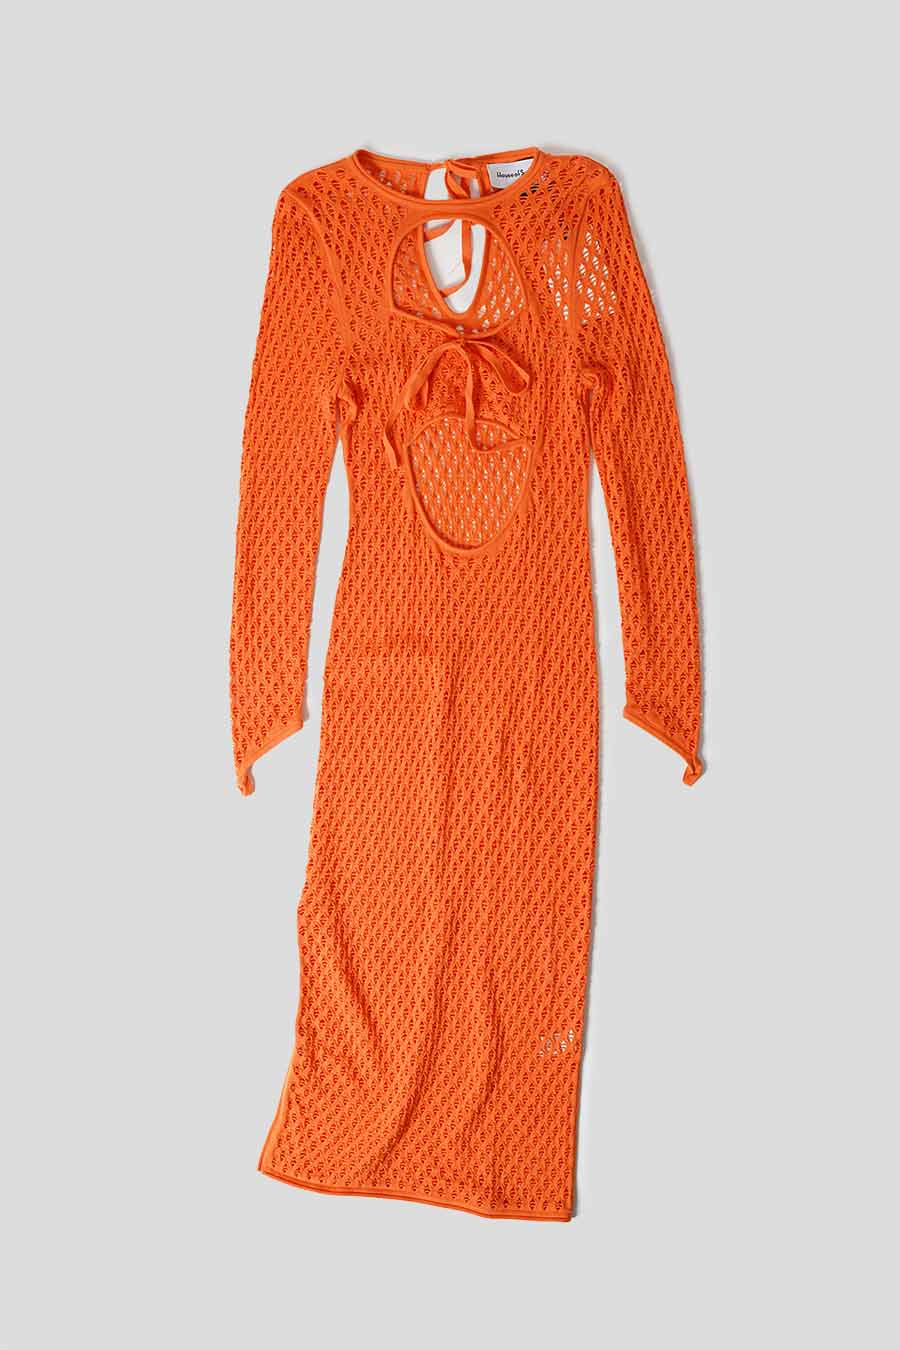 house of sunny - ORANGE KNITTED CAPTURE DRESS - LE LABO STORE